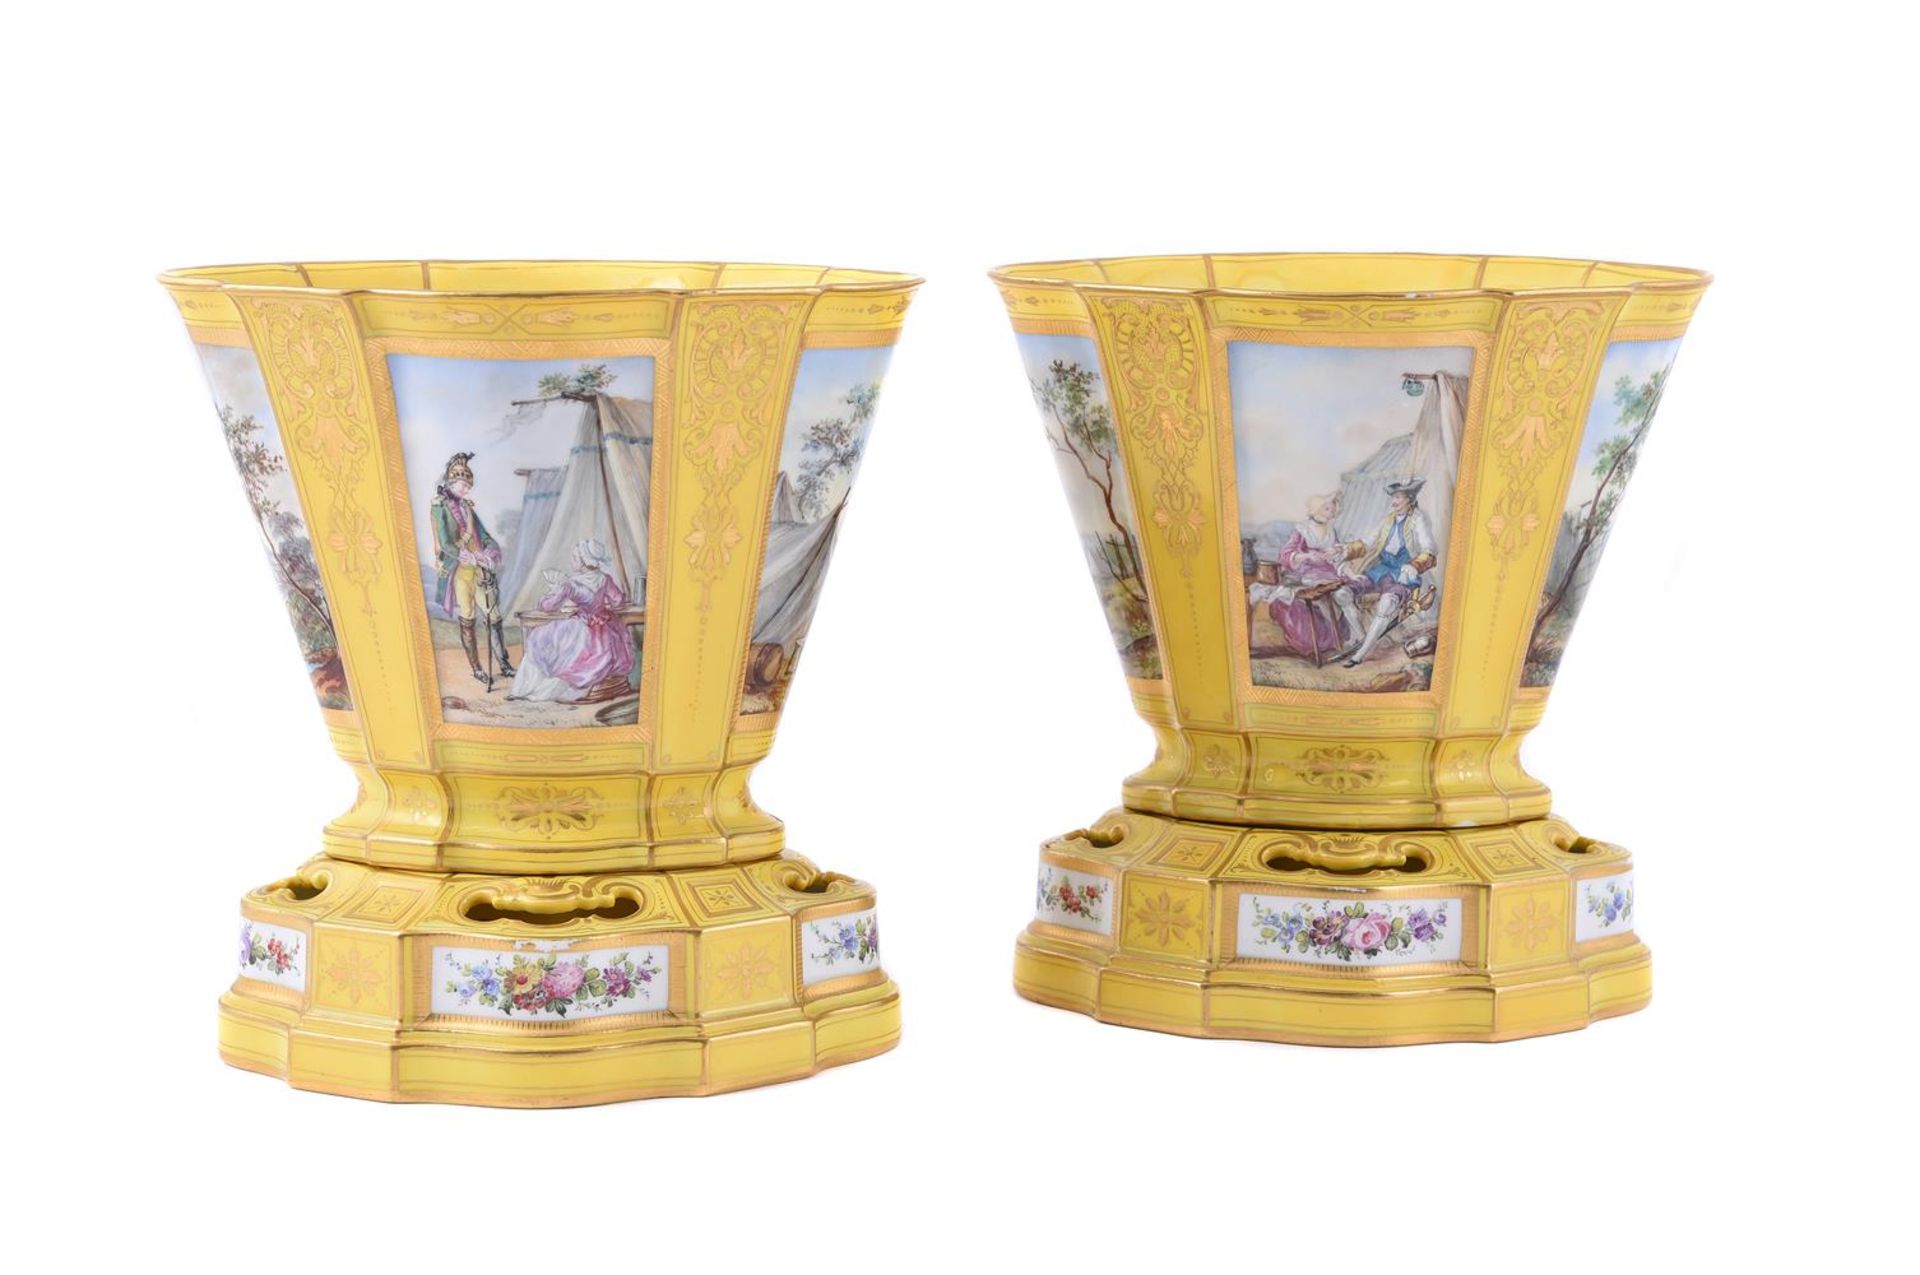 A PAIR OF FRENCH PORCELAIN YELLOW-GROUND SEVRES-STLYE VASES HOLLANDAIS